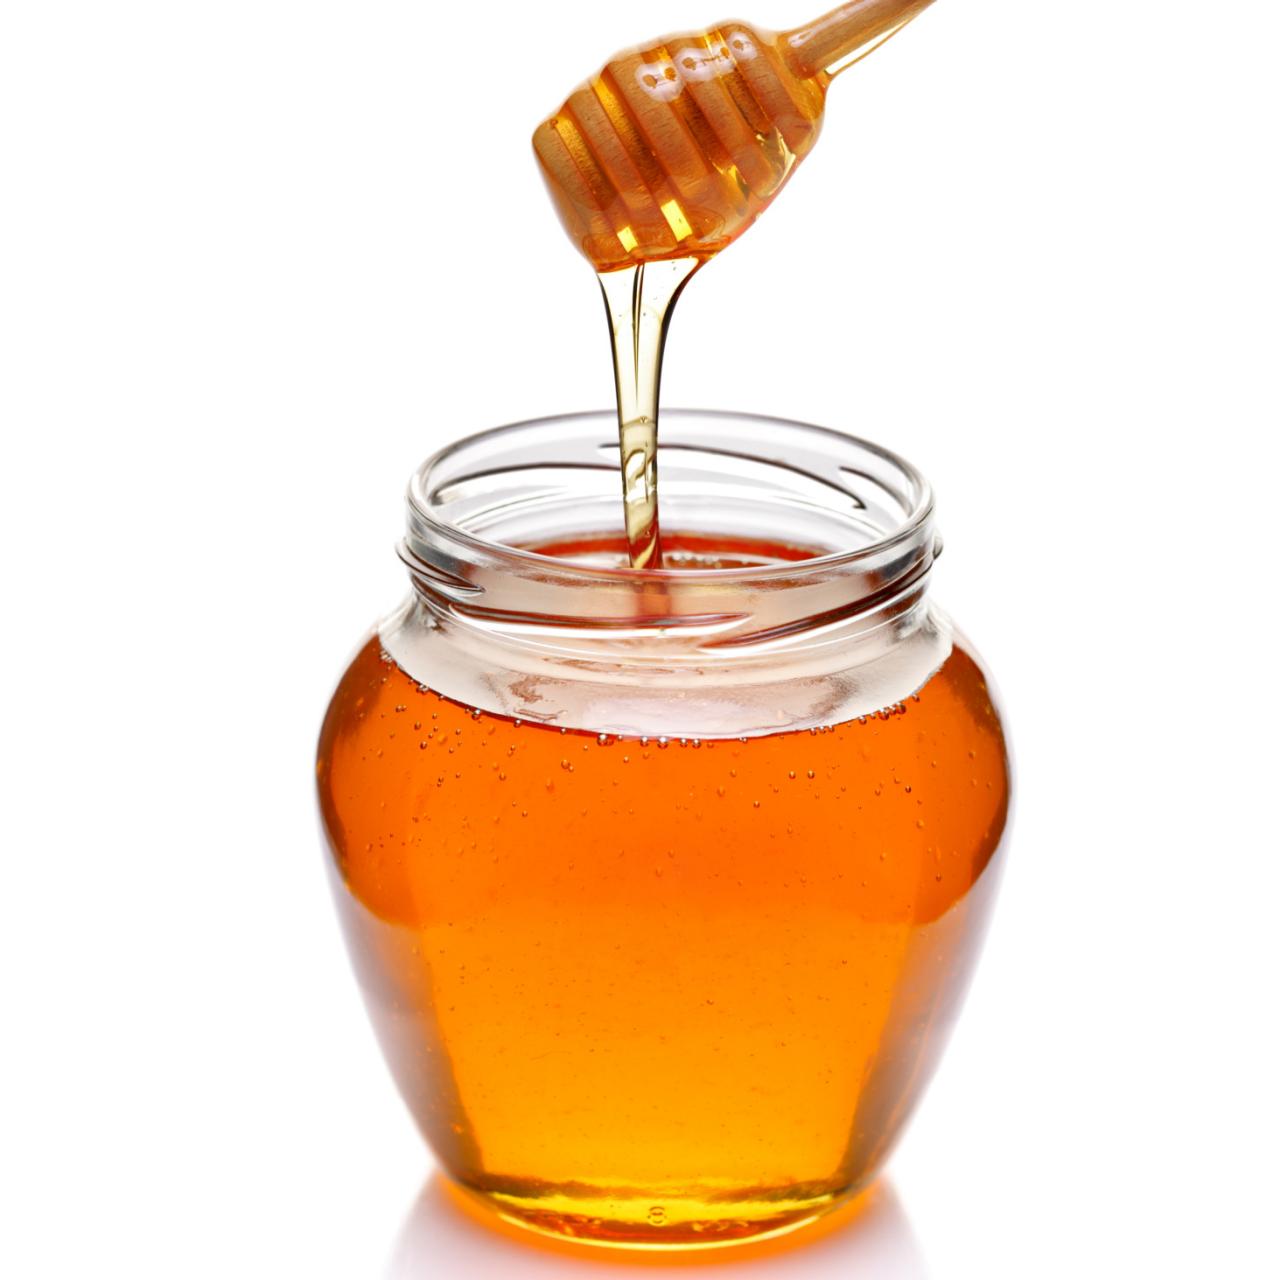 How To Store Honey After Opening